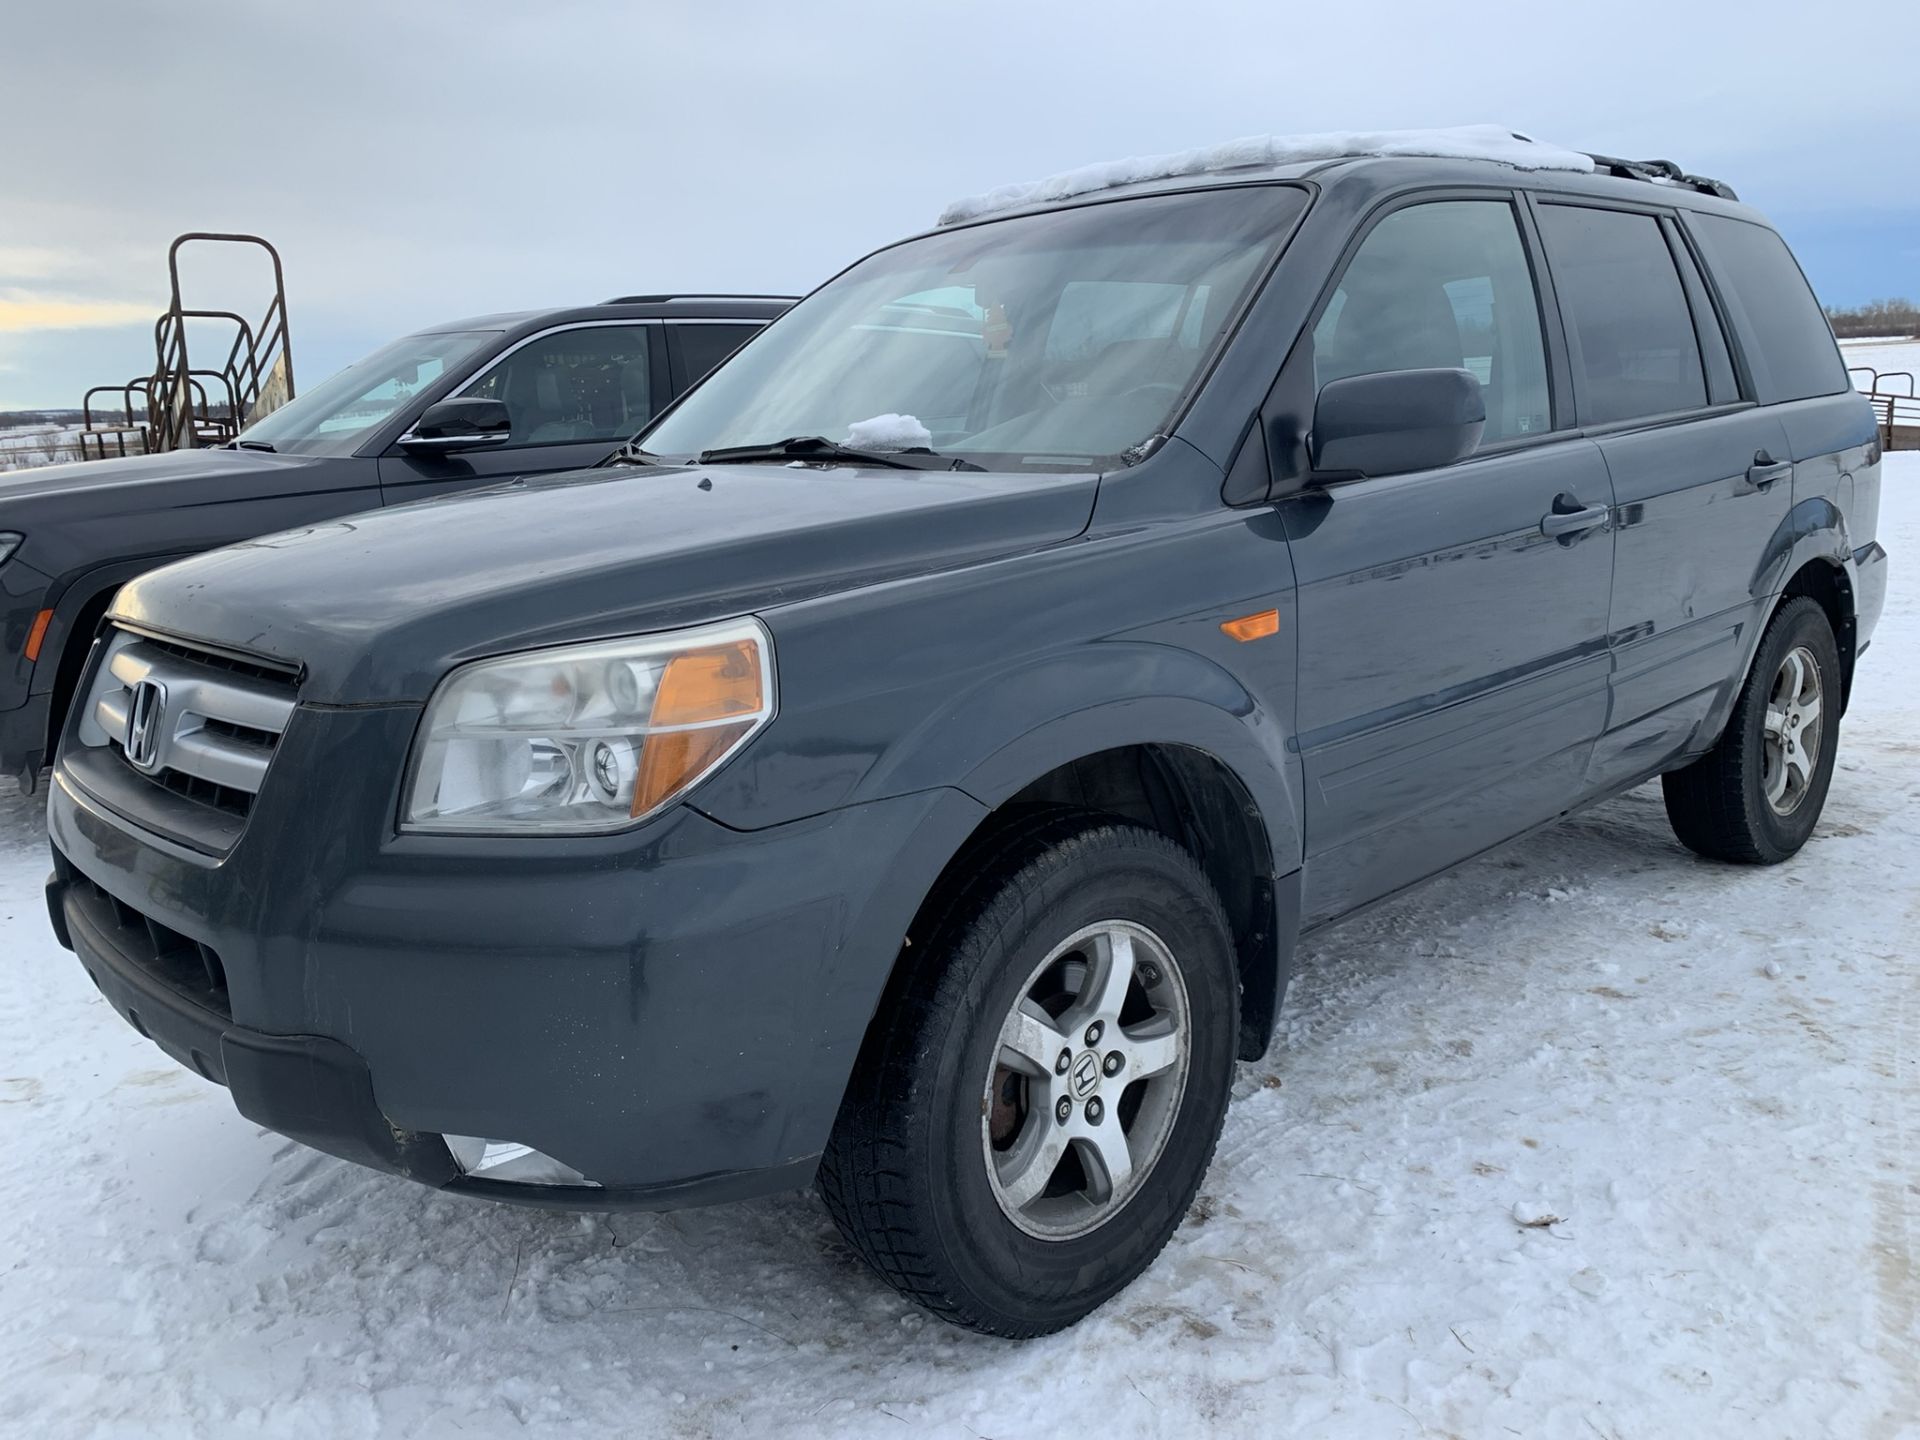 2006 HONDA PILOT SUV, AWD, V6, 4DR, LEATHER, APROX. 375,000 KMS SHOWING, S/N 2HKYF18546H003826